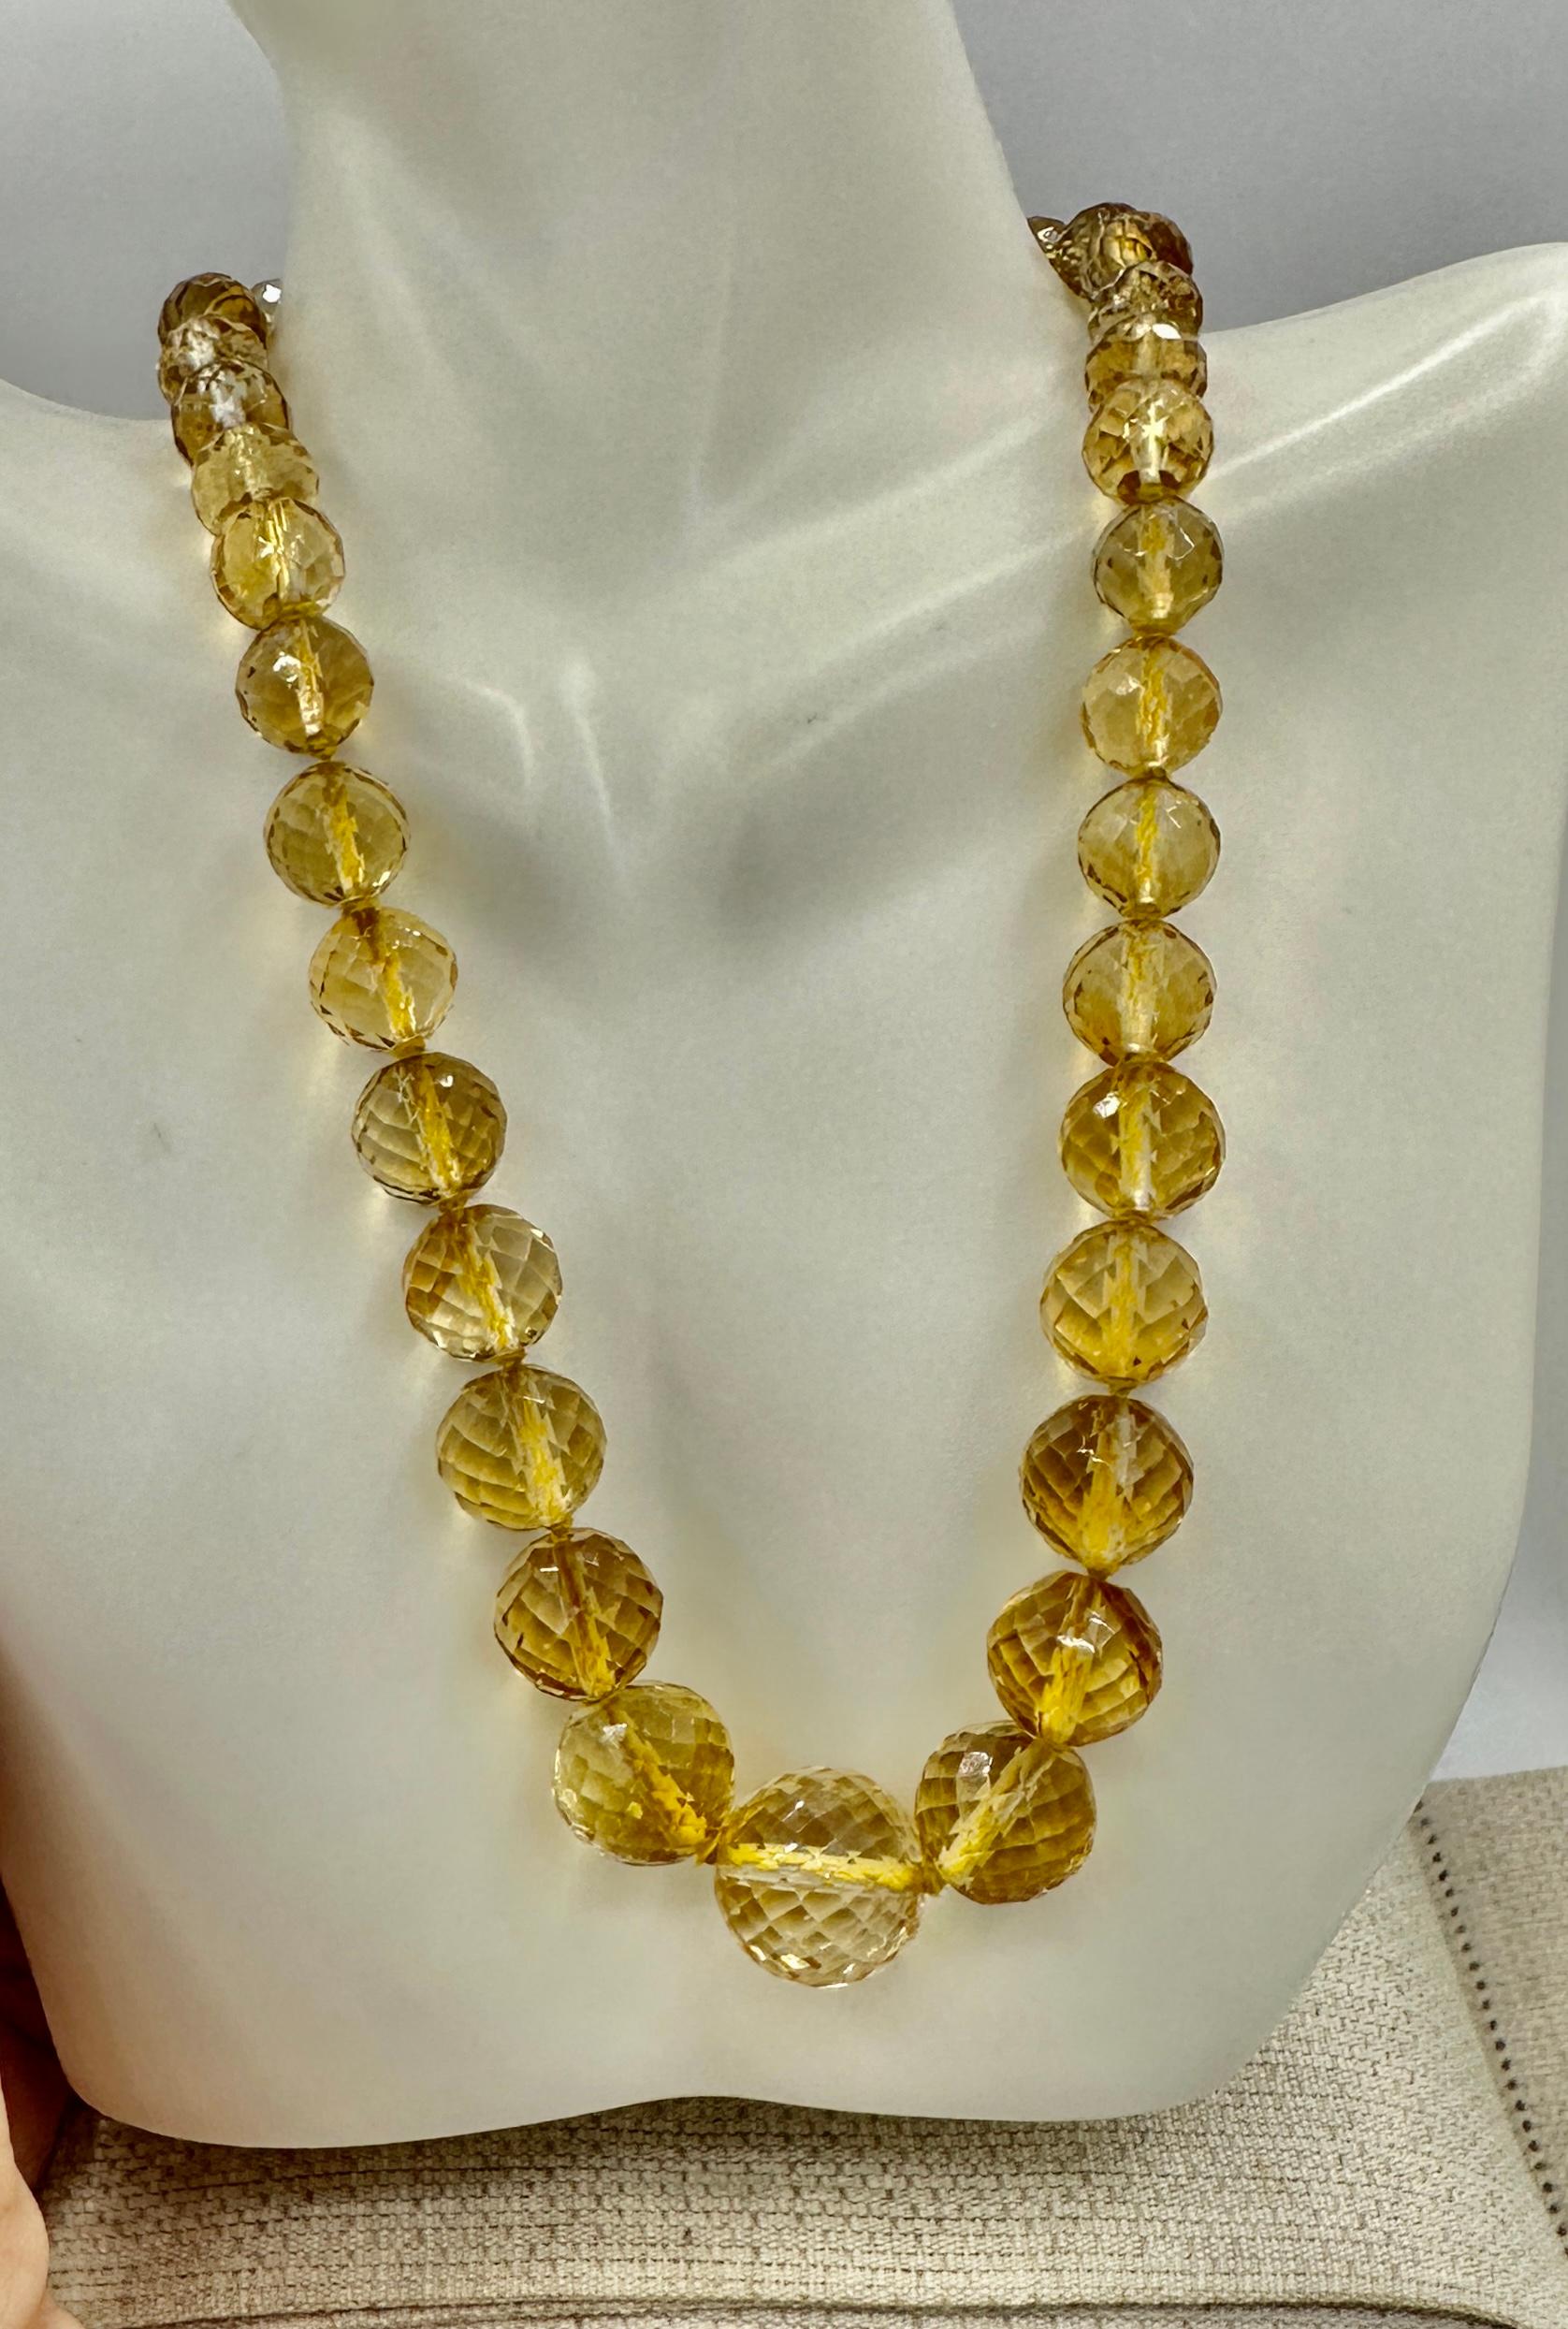 Women's Art Deco Faceted Citrine Necklace Graduated Citrine Beads Gold Circa 1920 For Sale